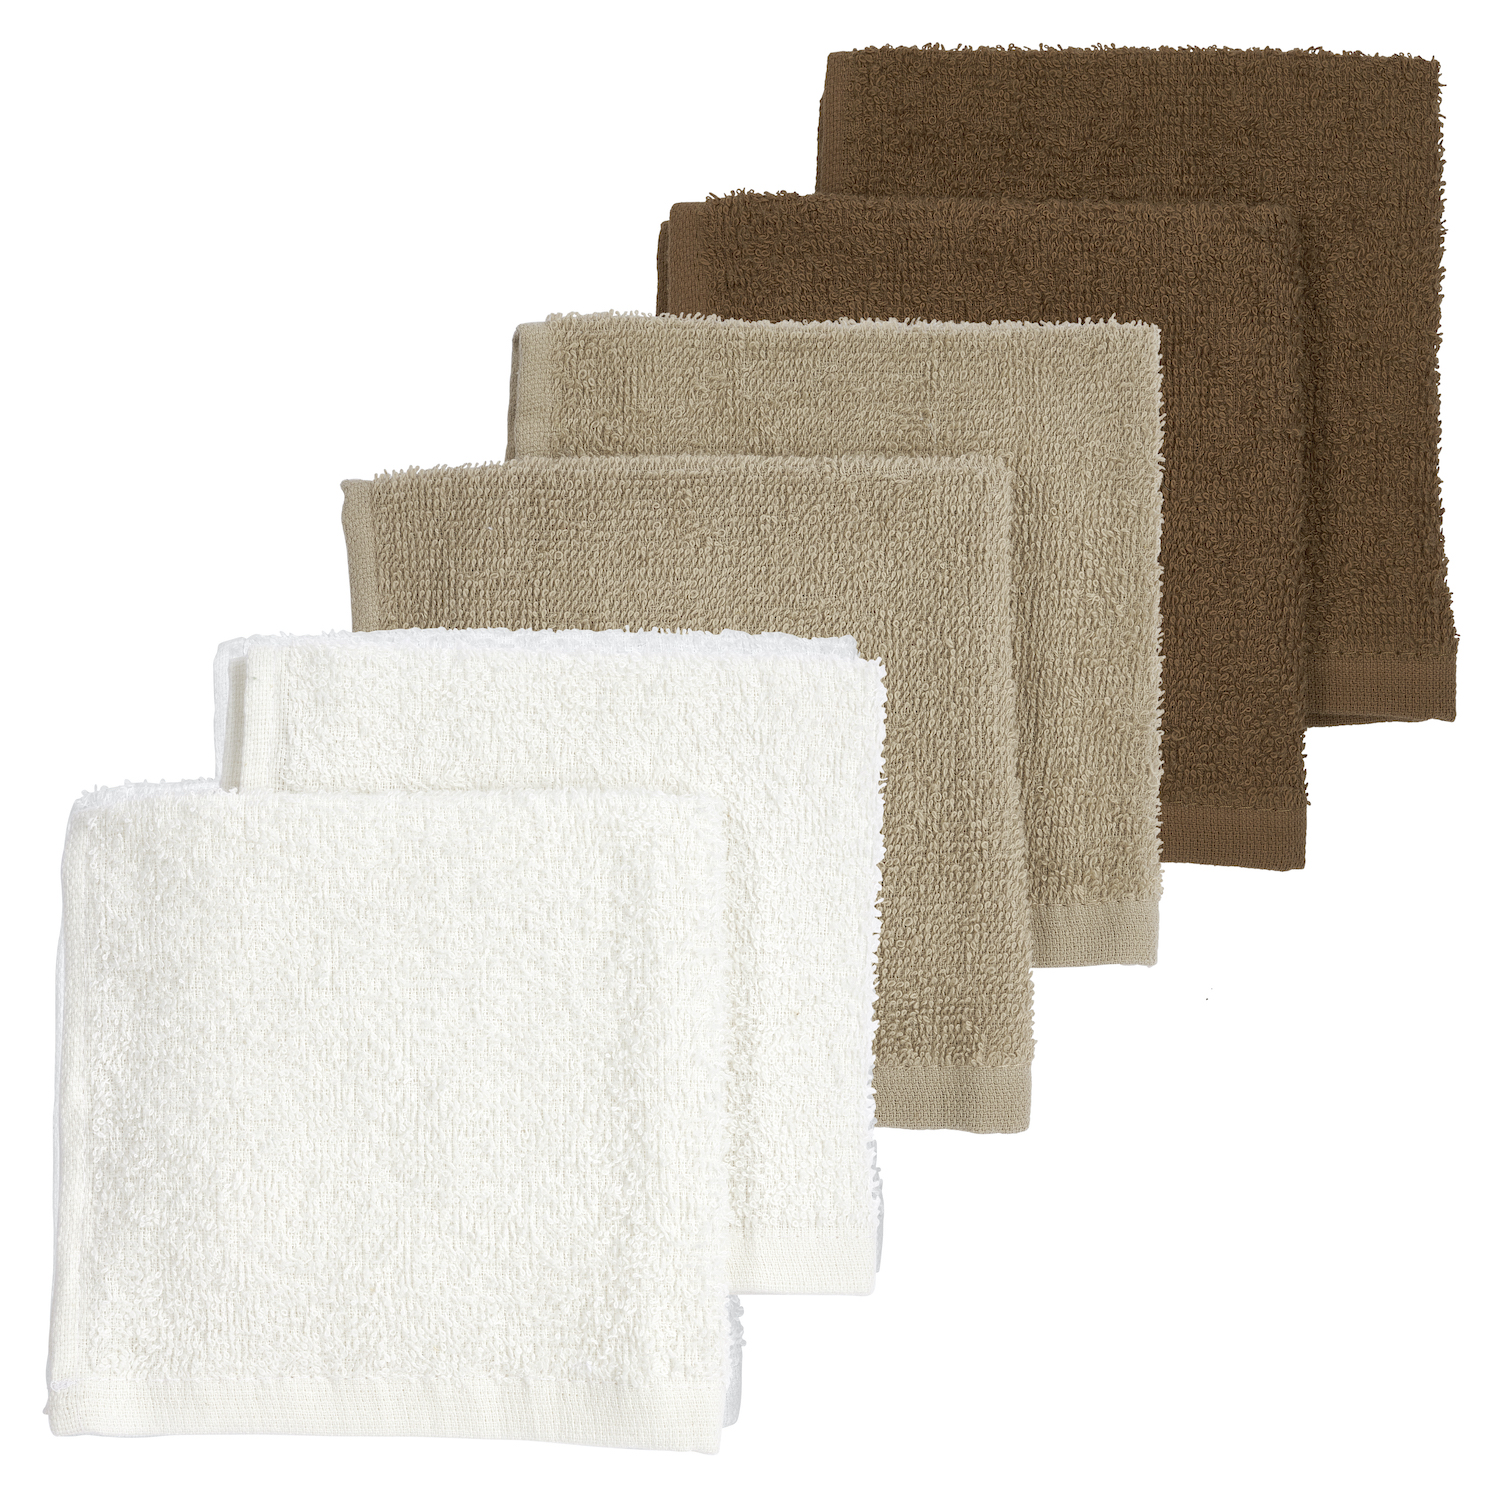 Basic Terry Face Cloths 6-pack  - Offwhite/Taupe/Chocolate - 30x30cm